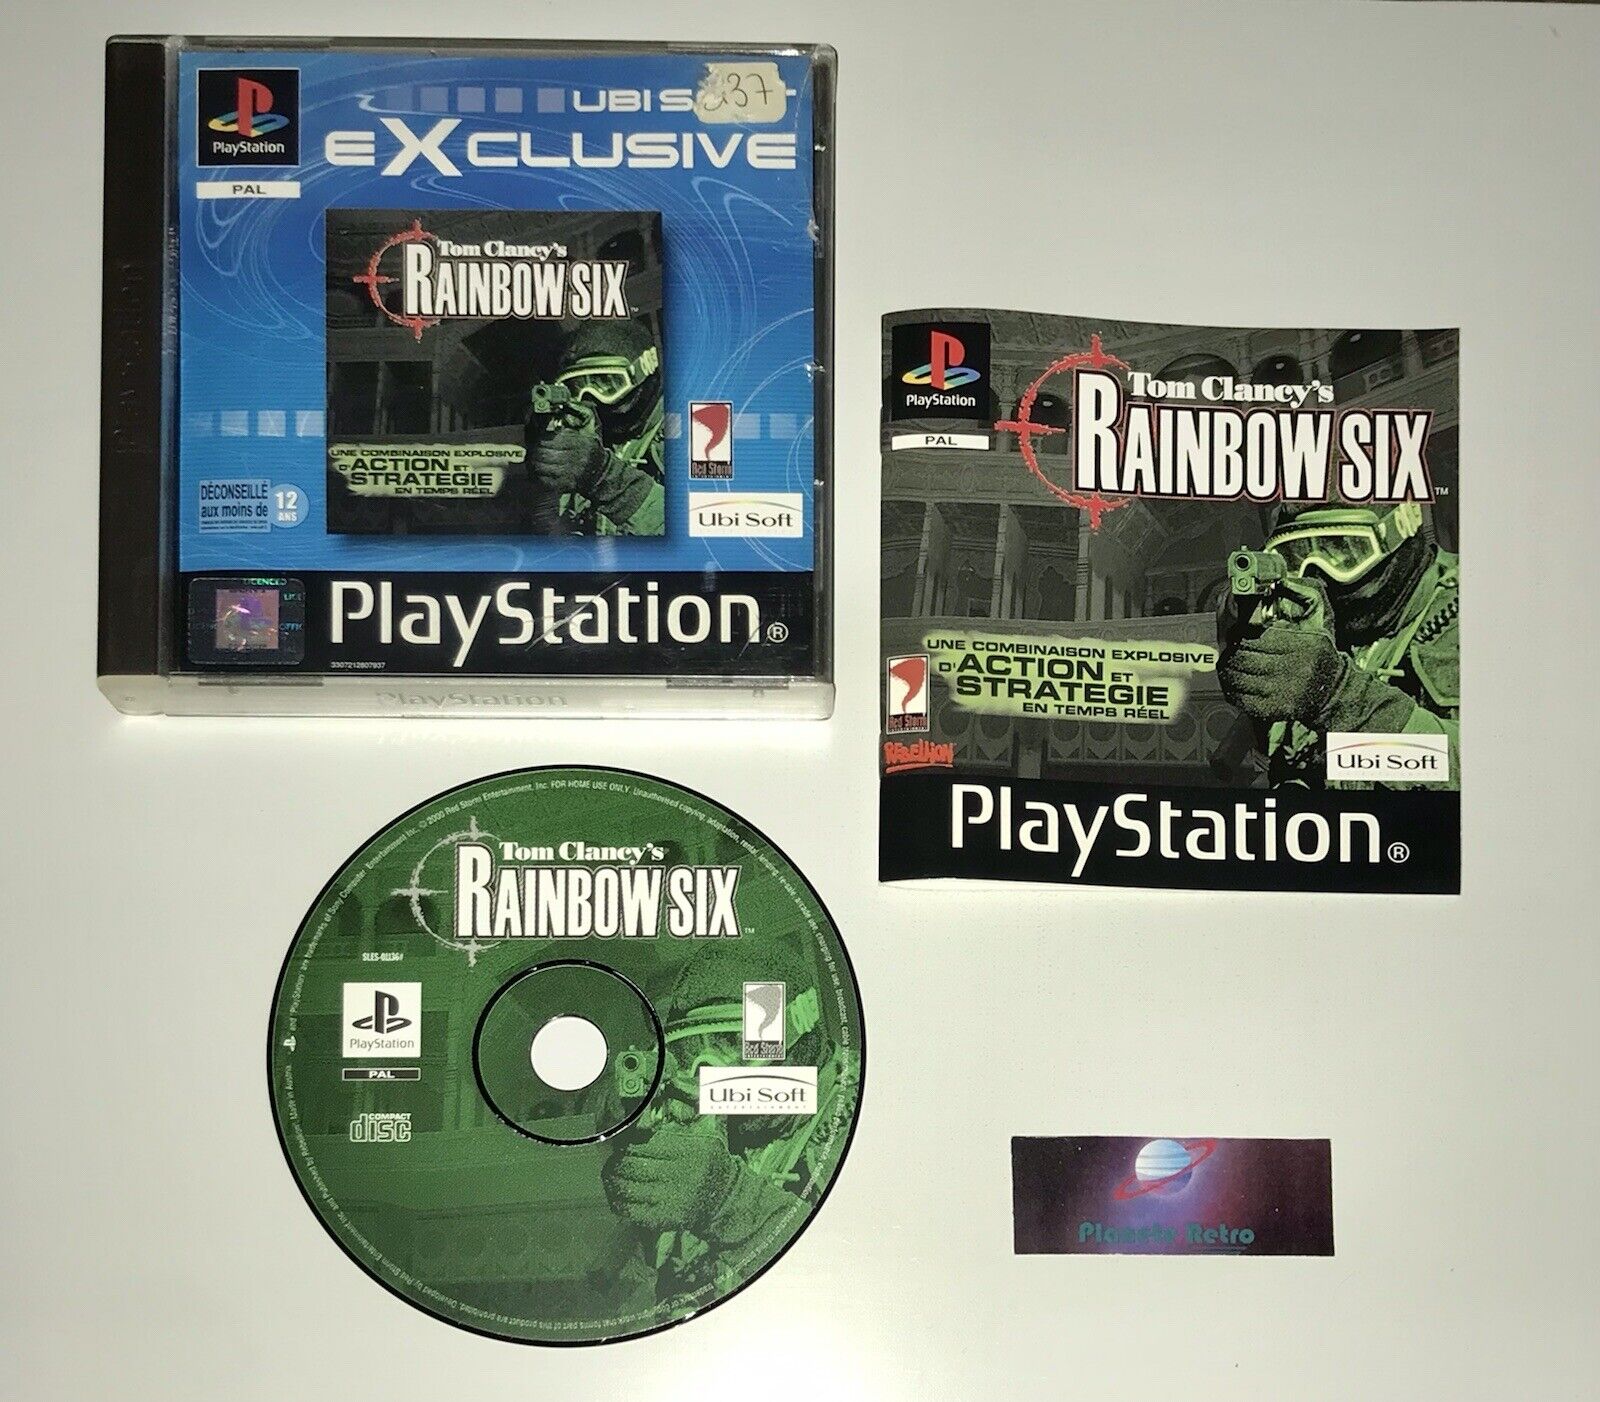 Rainbow Six - PS1 Complet Version Française PlayStation Sony Exclusive